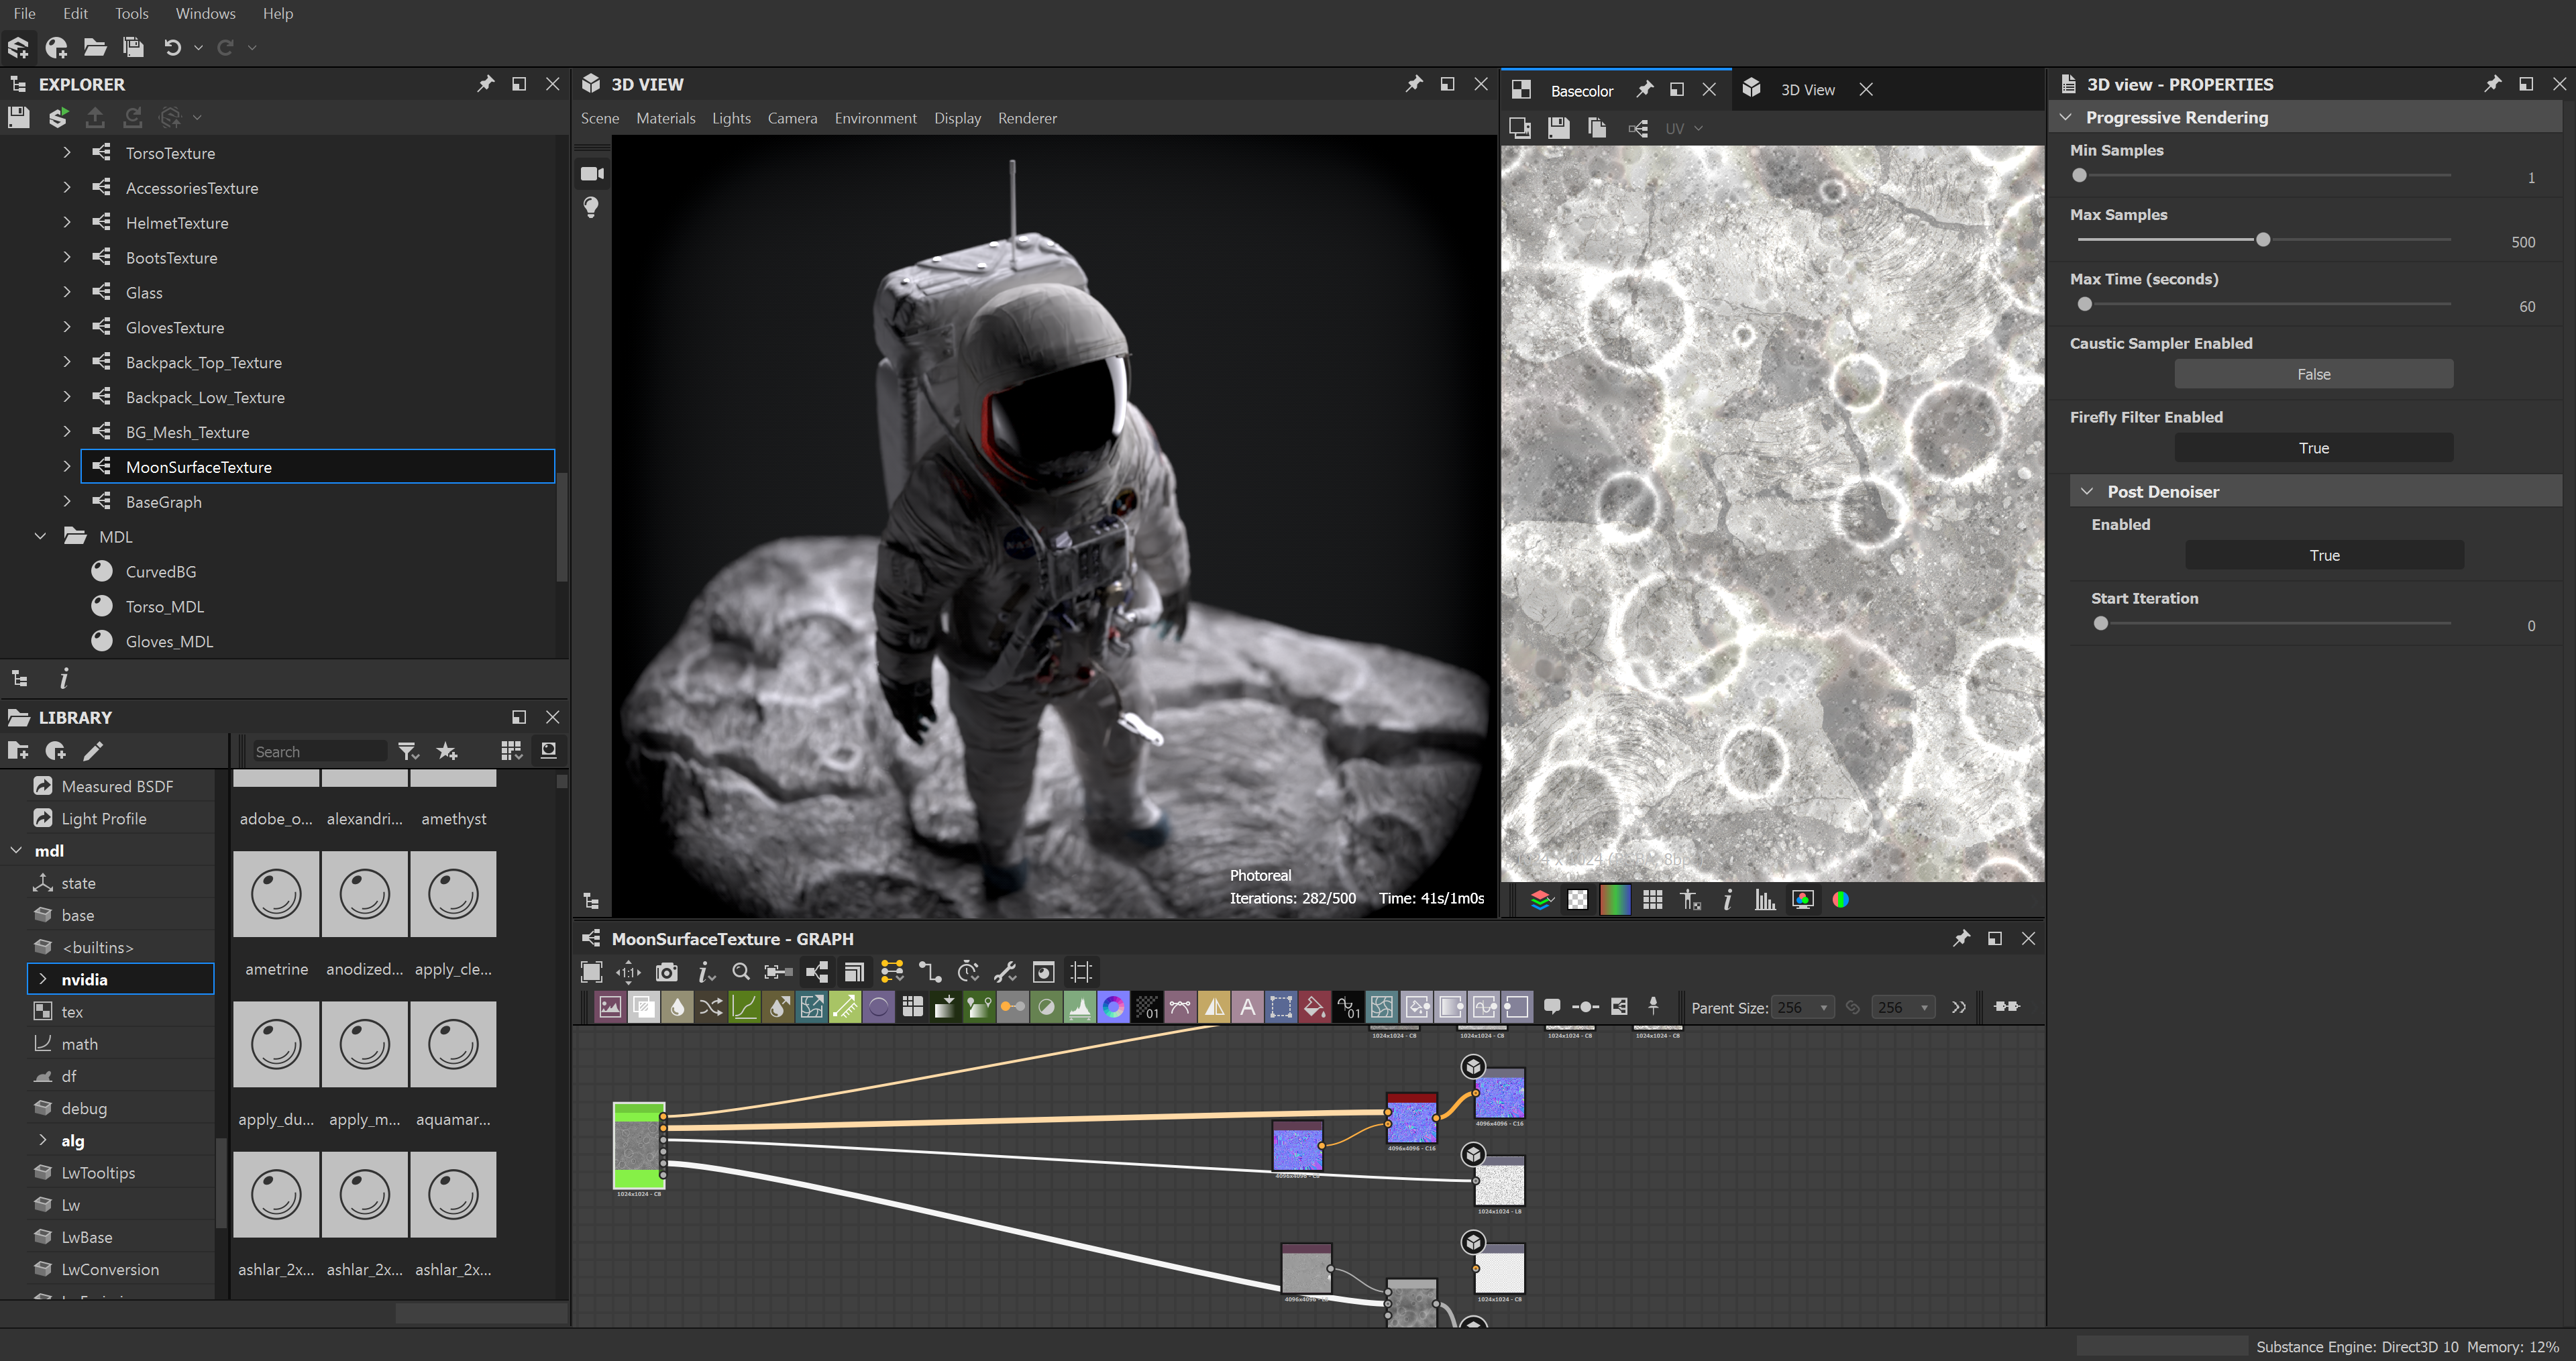 New Studio Driver Now Available, Optimizes Performance For Cinema 4D